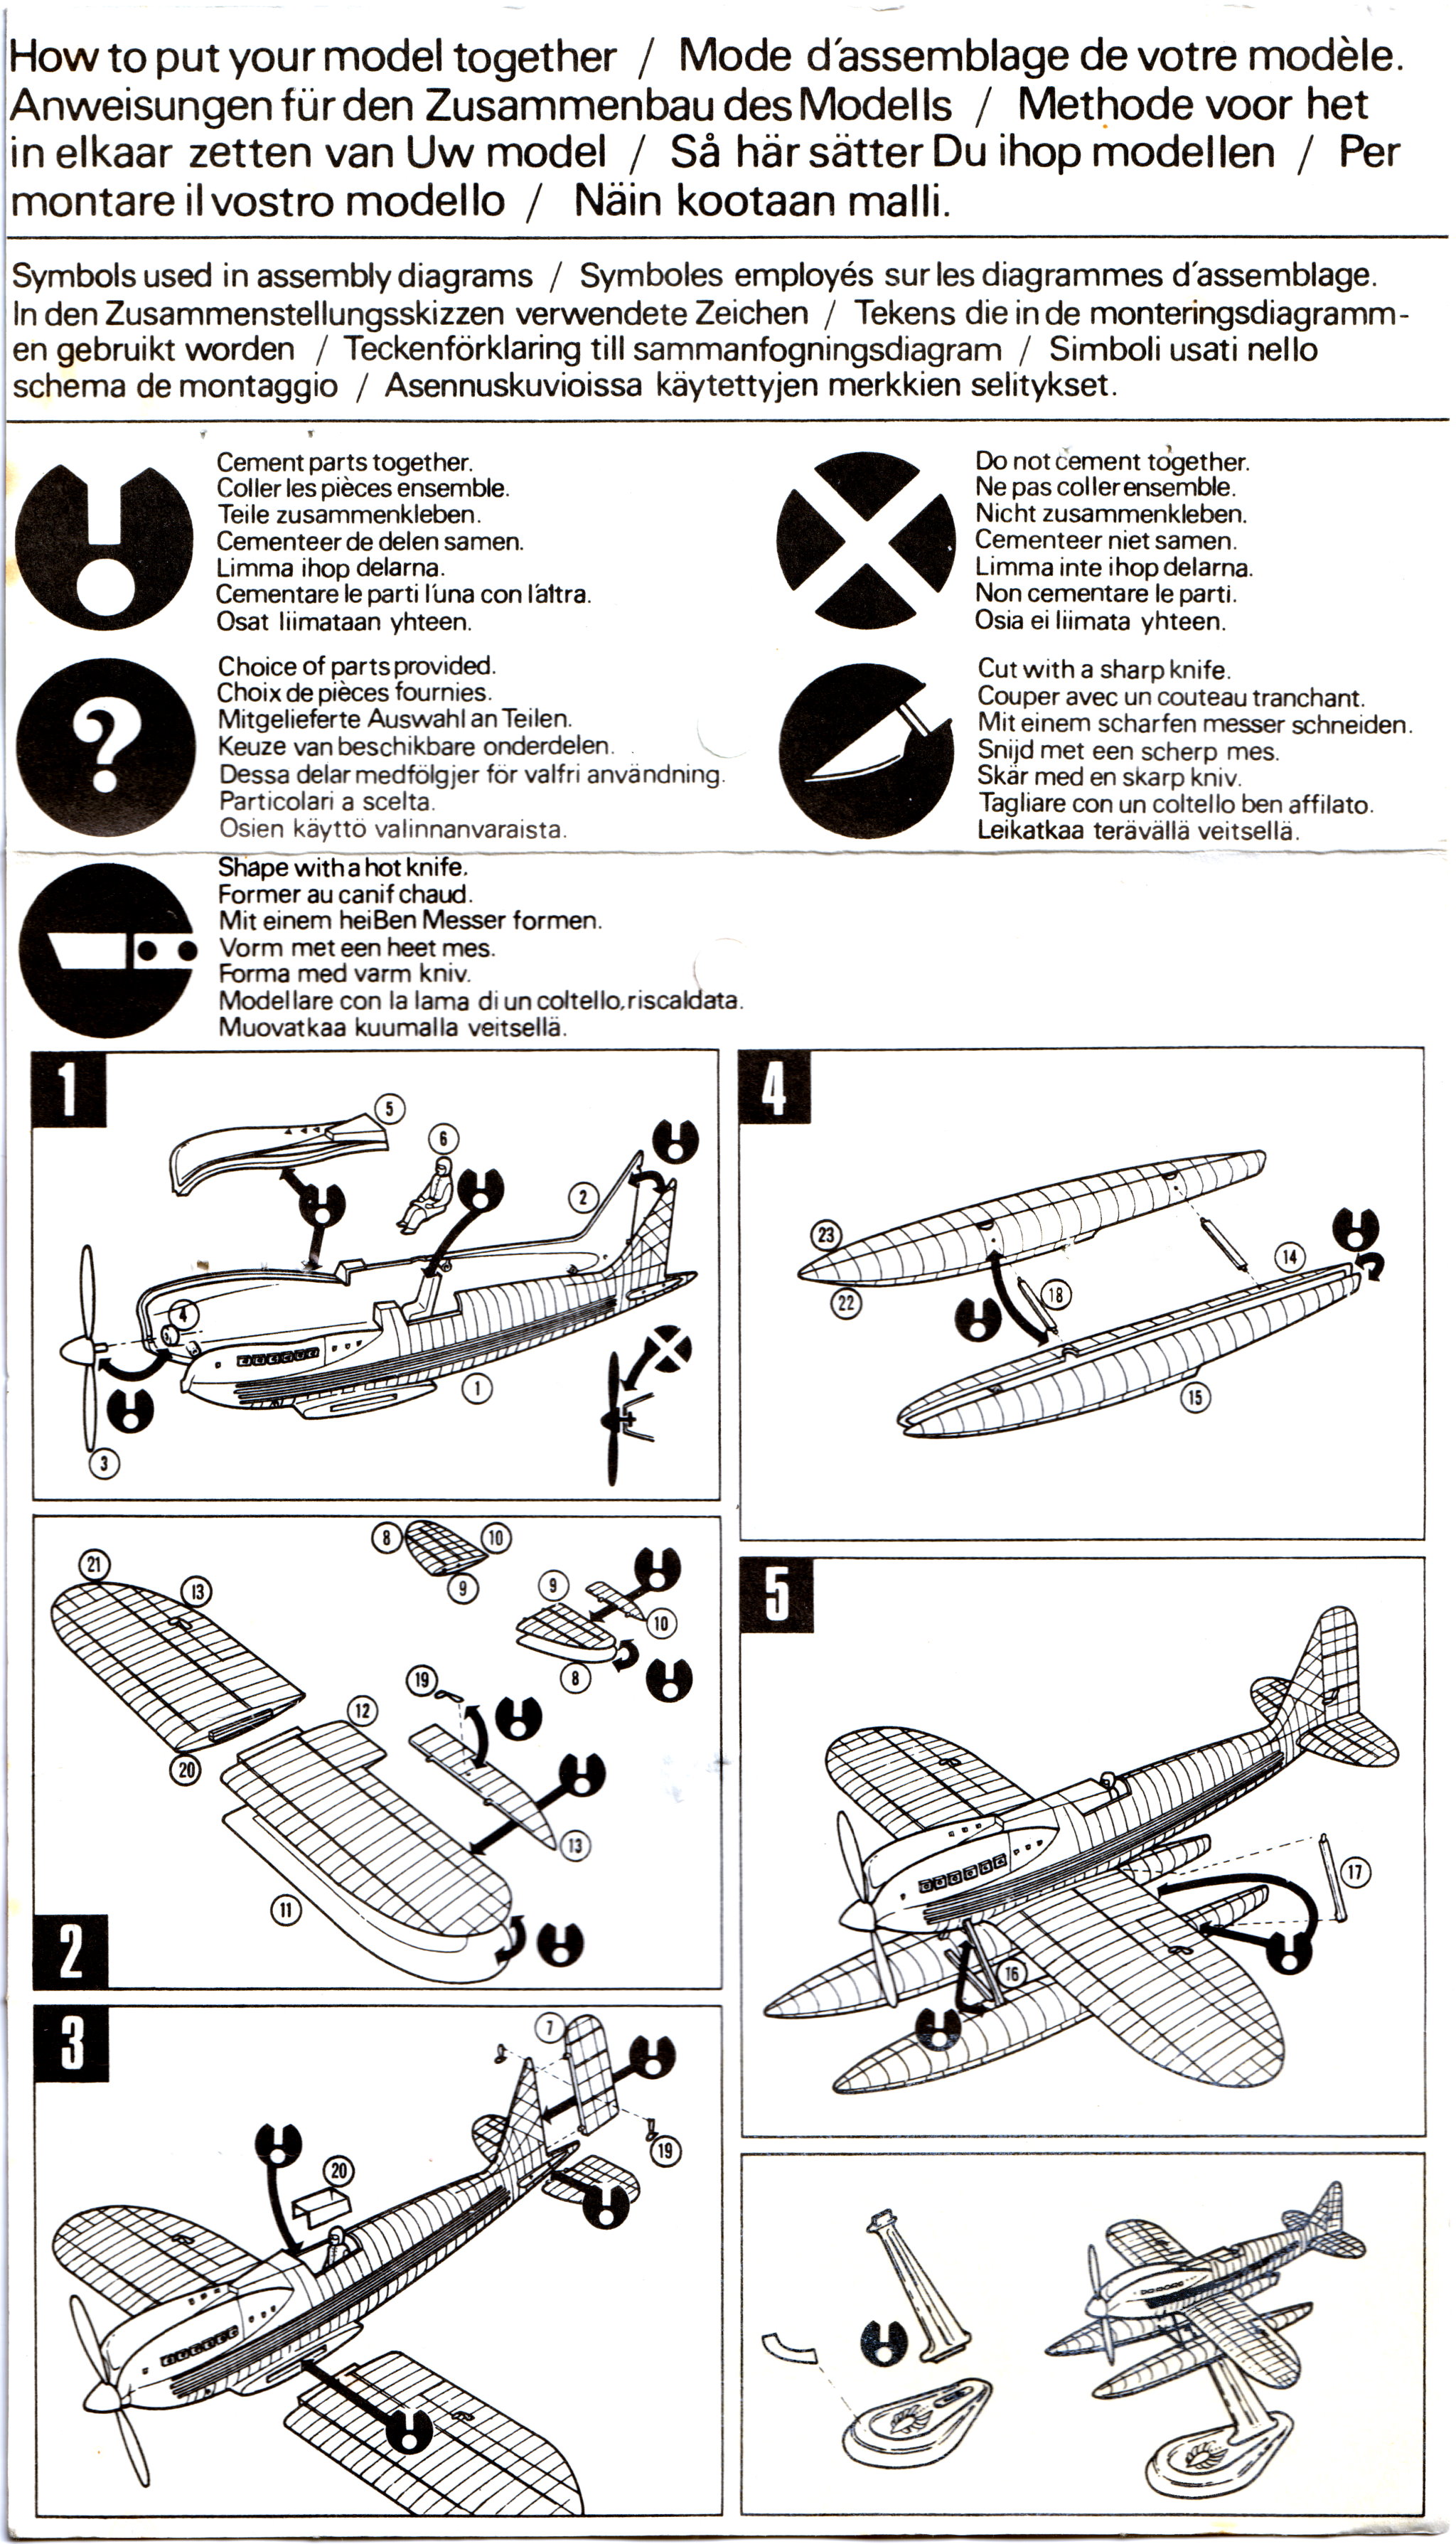 FROG F164F Supermarine S6b, Rovex Industries, 1970 assembly instructions